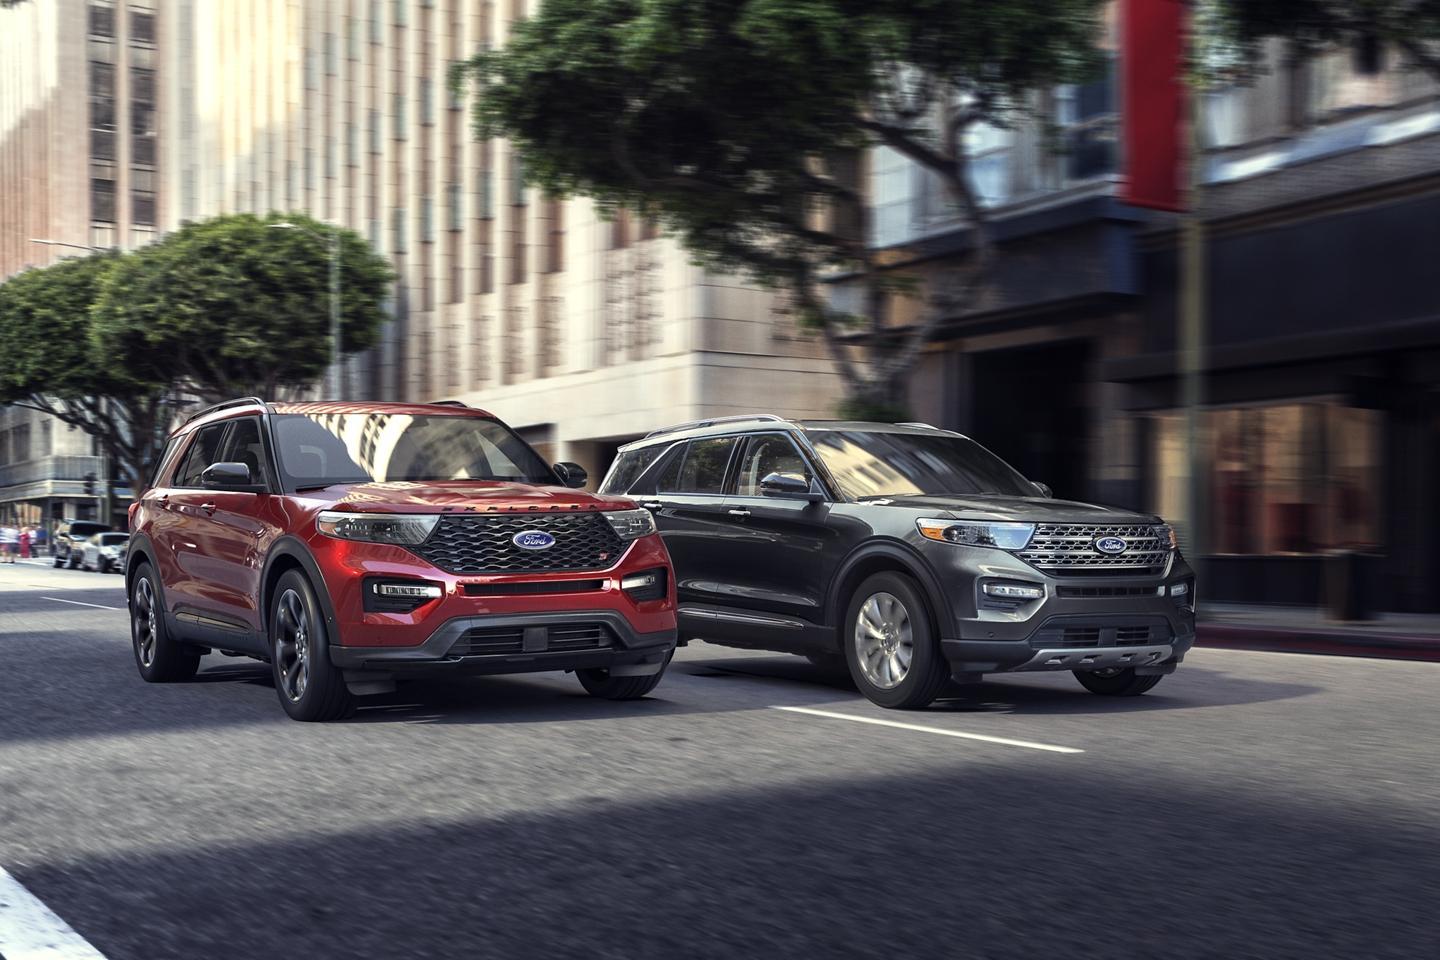  Ford All-New 2020 Explorer image